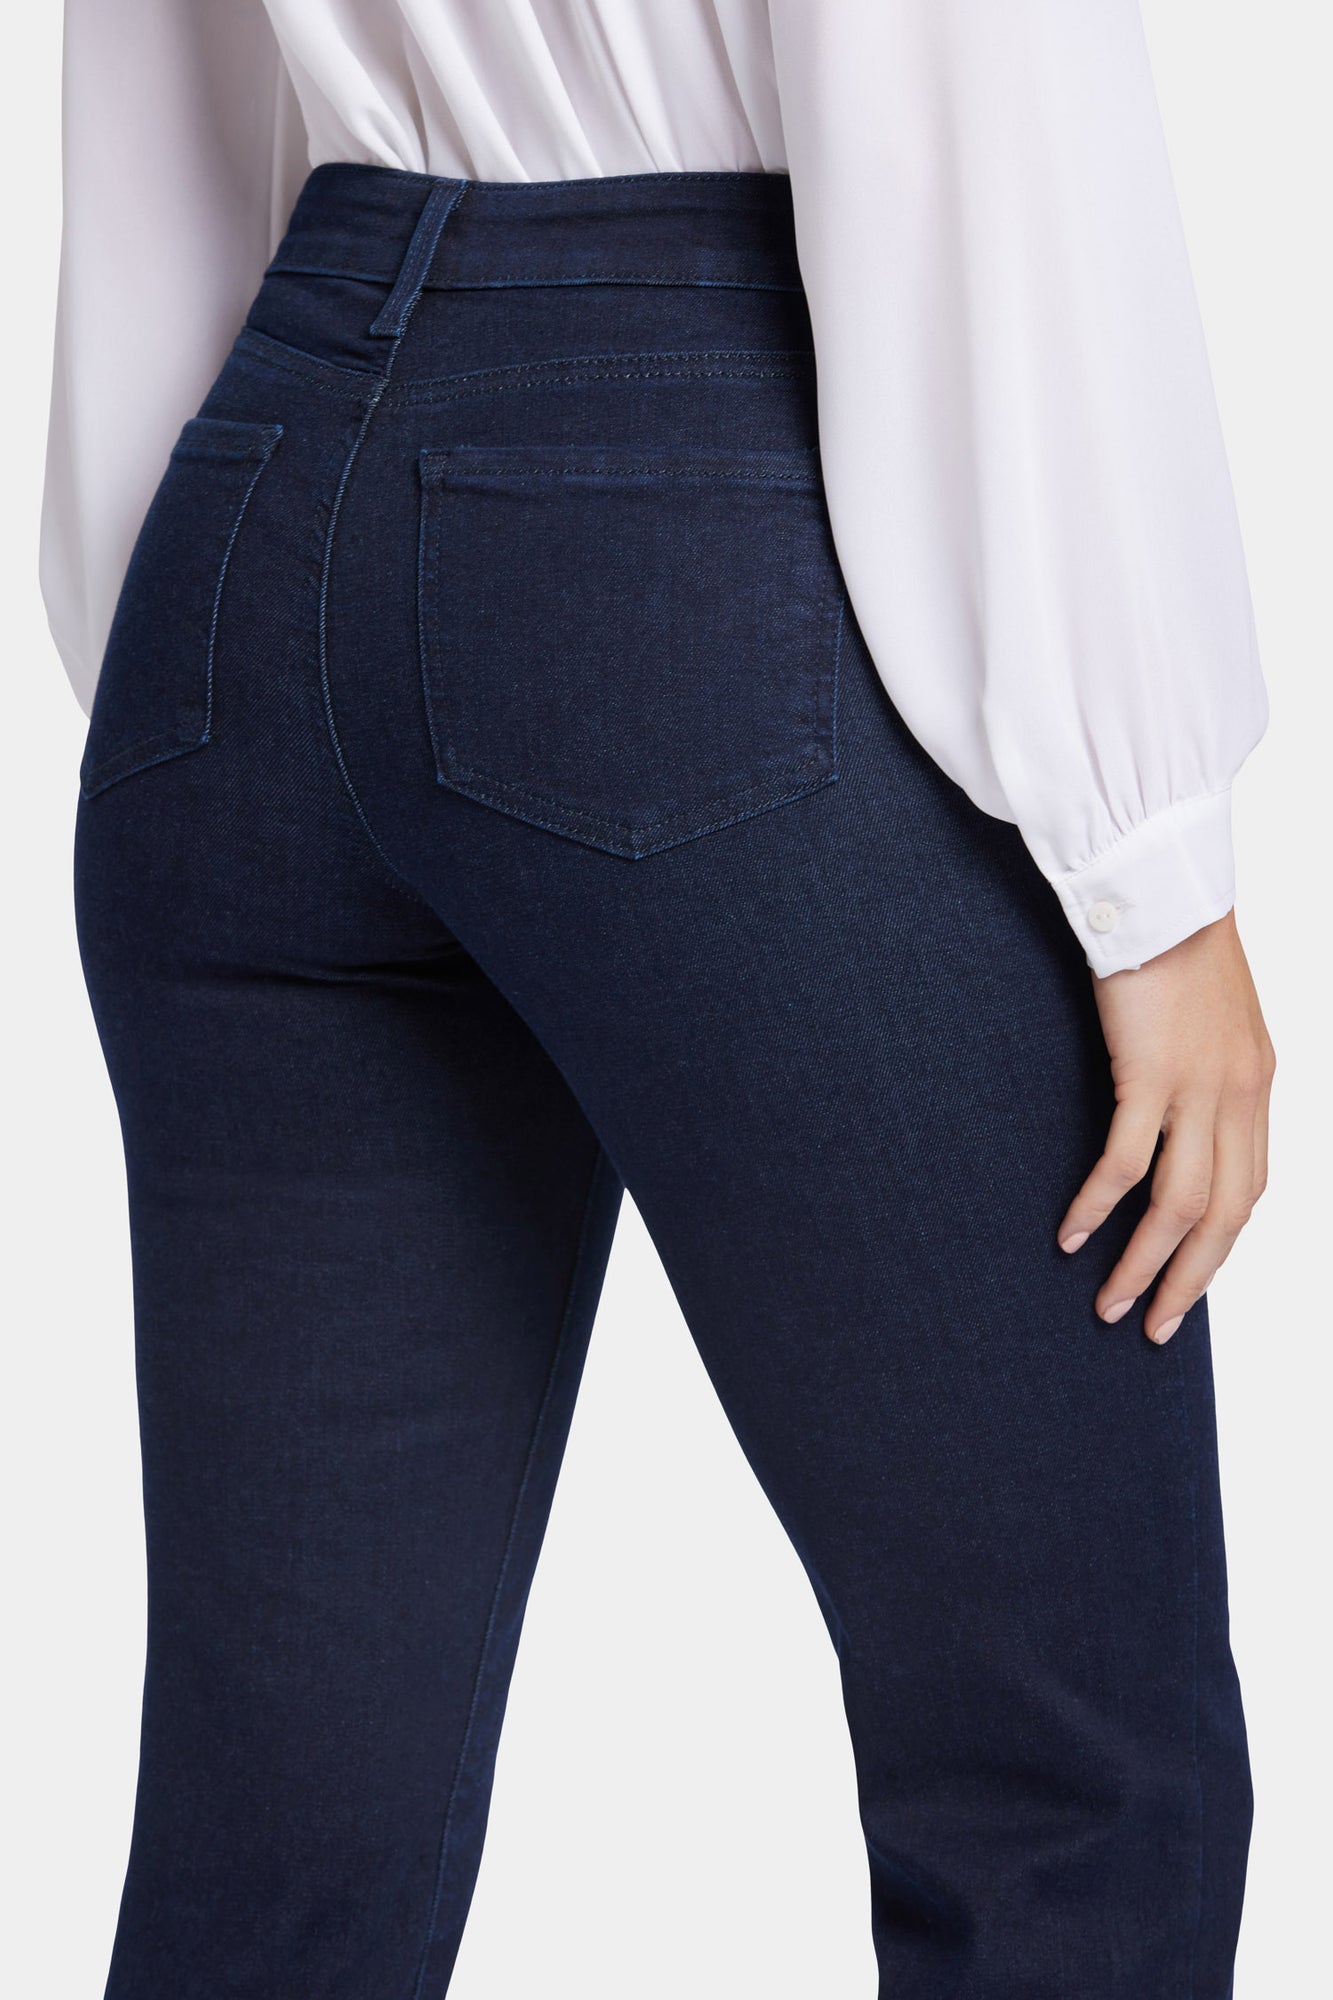 NYDJ Blake Slim Flared Jeans In Petite With High Rise - Rinse